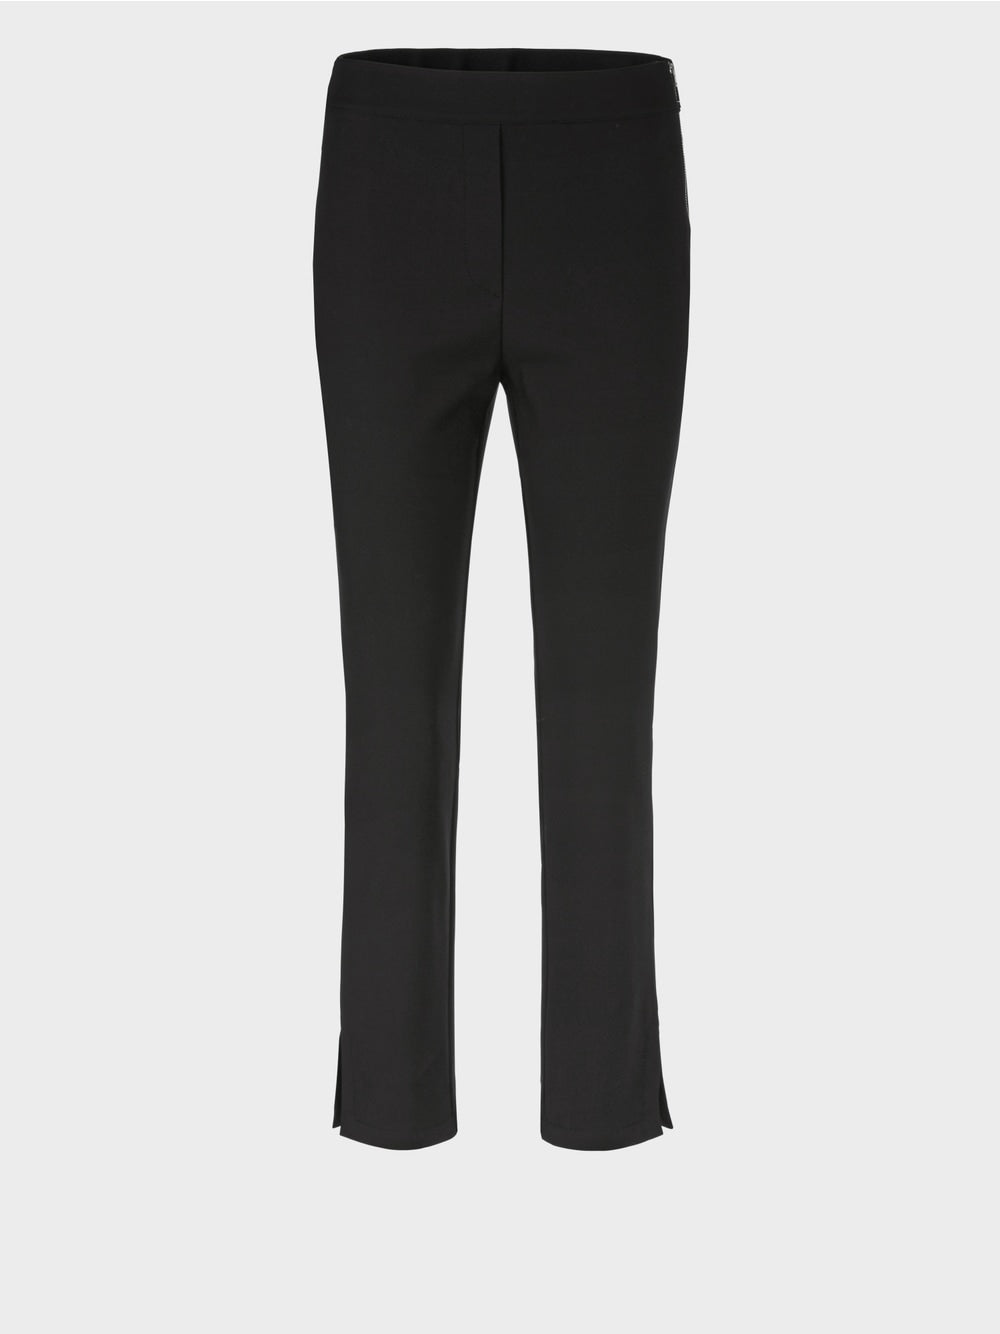 Slim trousers with high waist